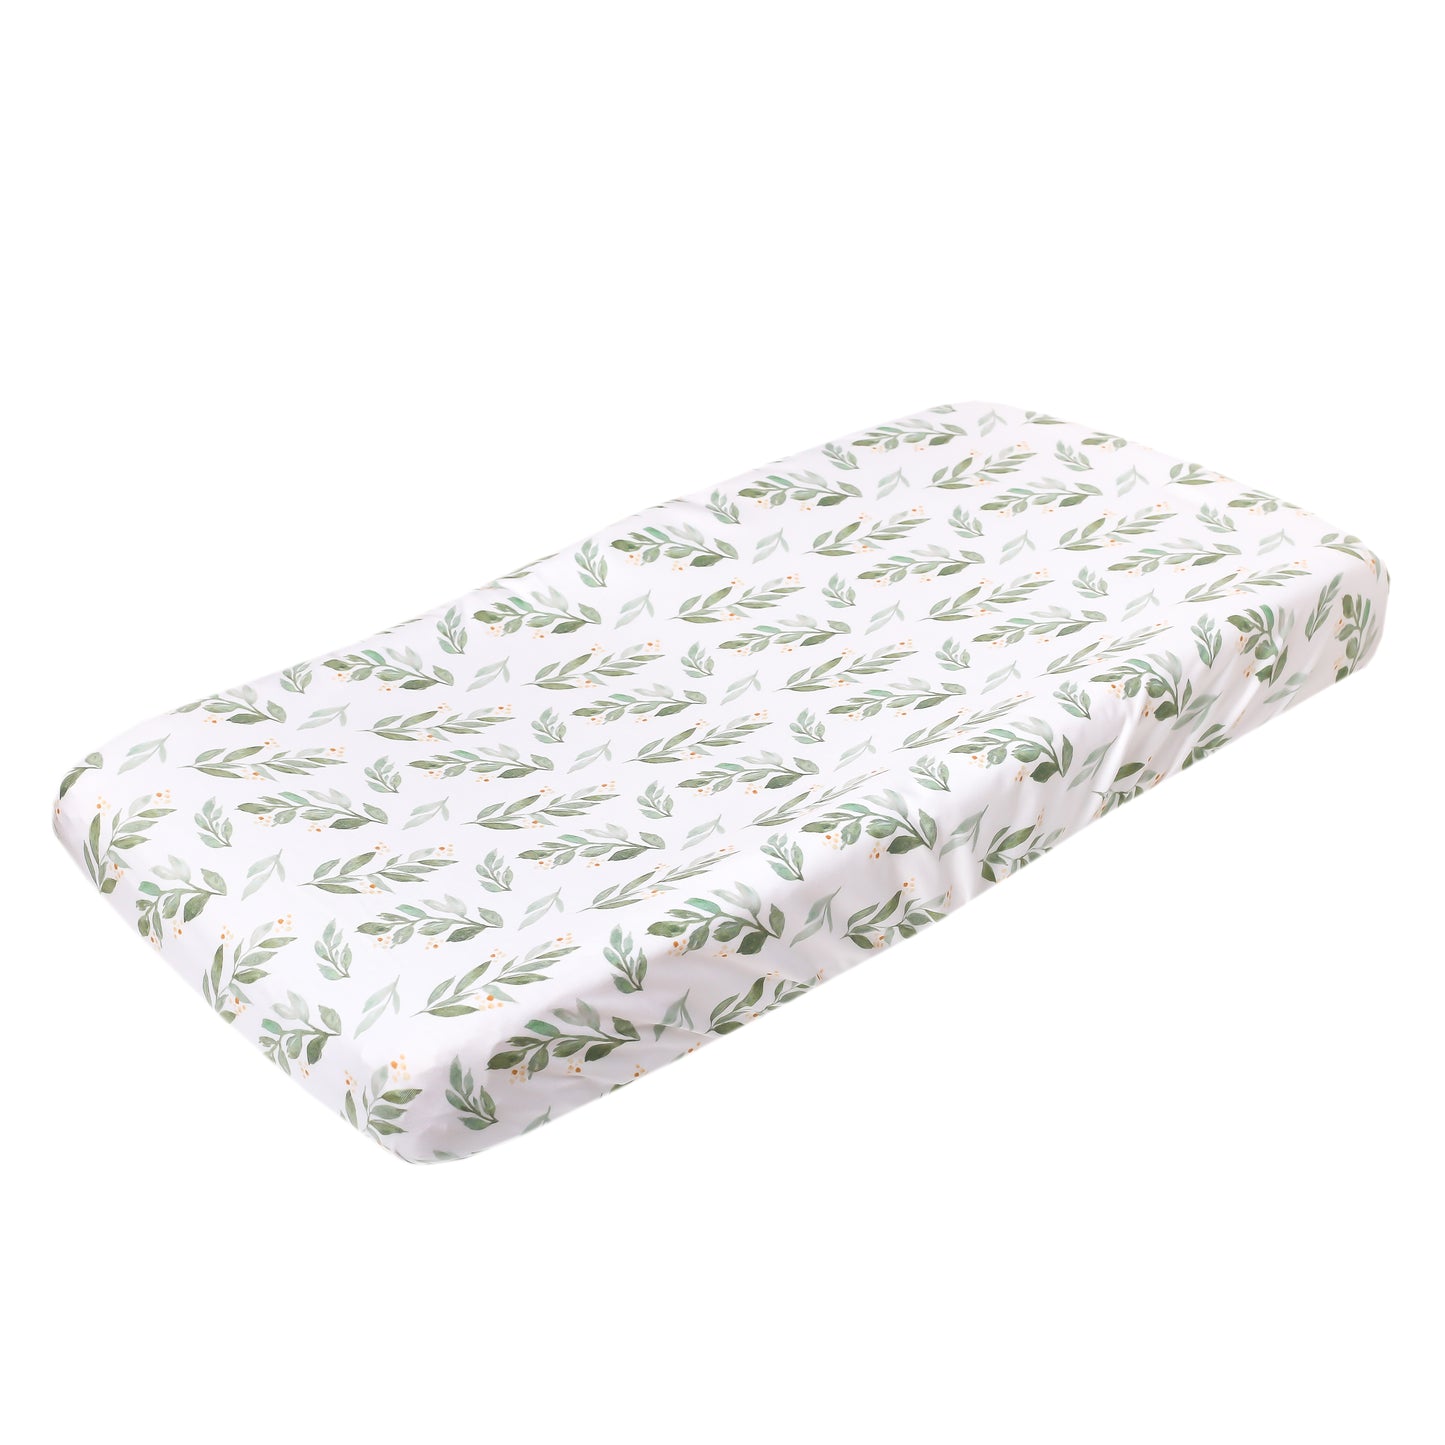 Fern Premium Knit Changing Pad Cover